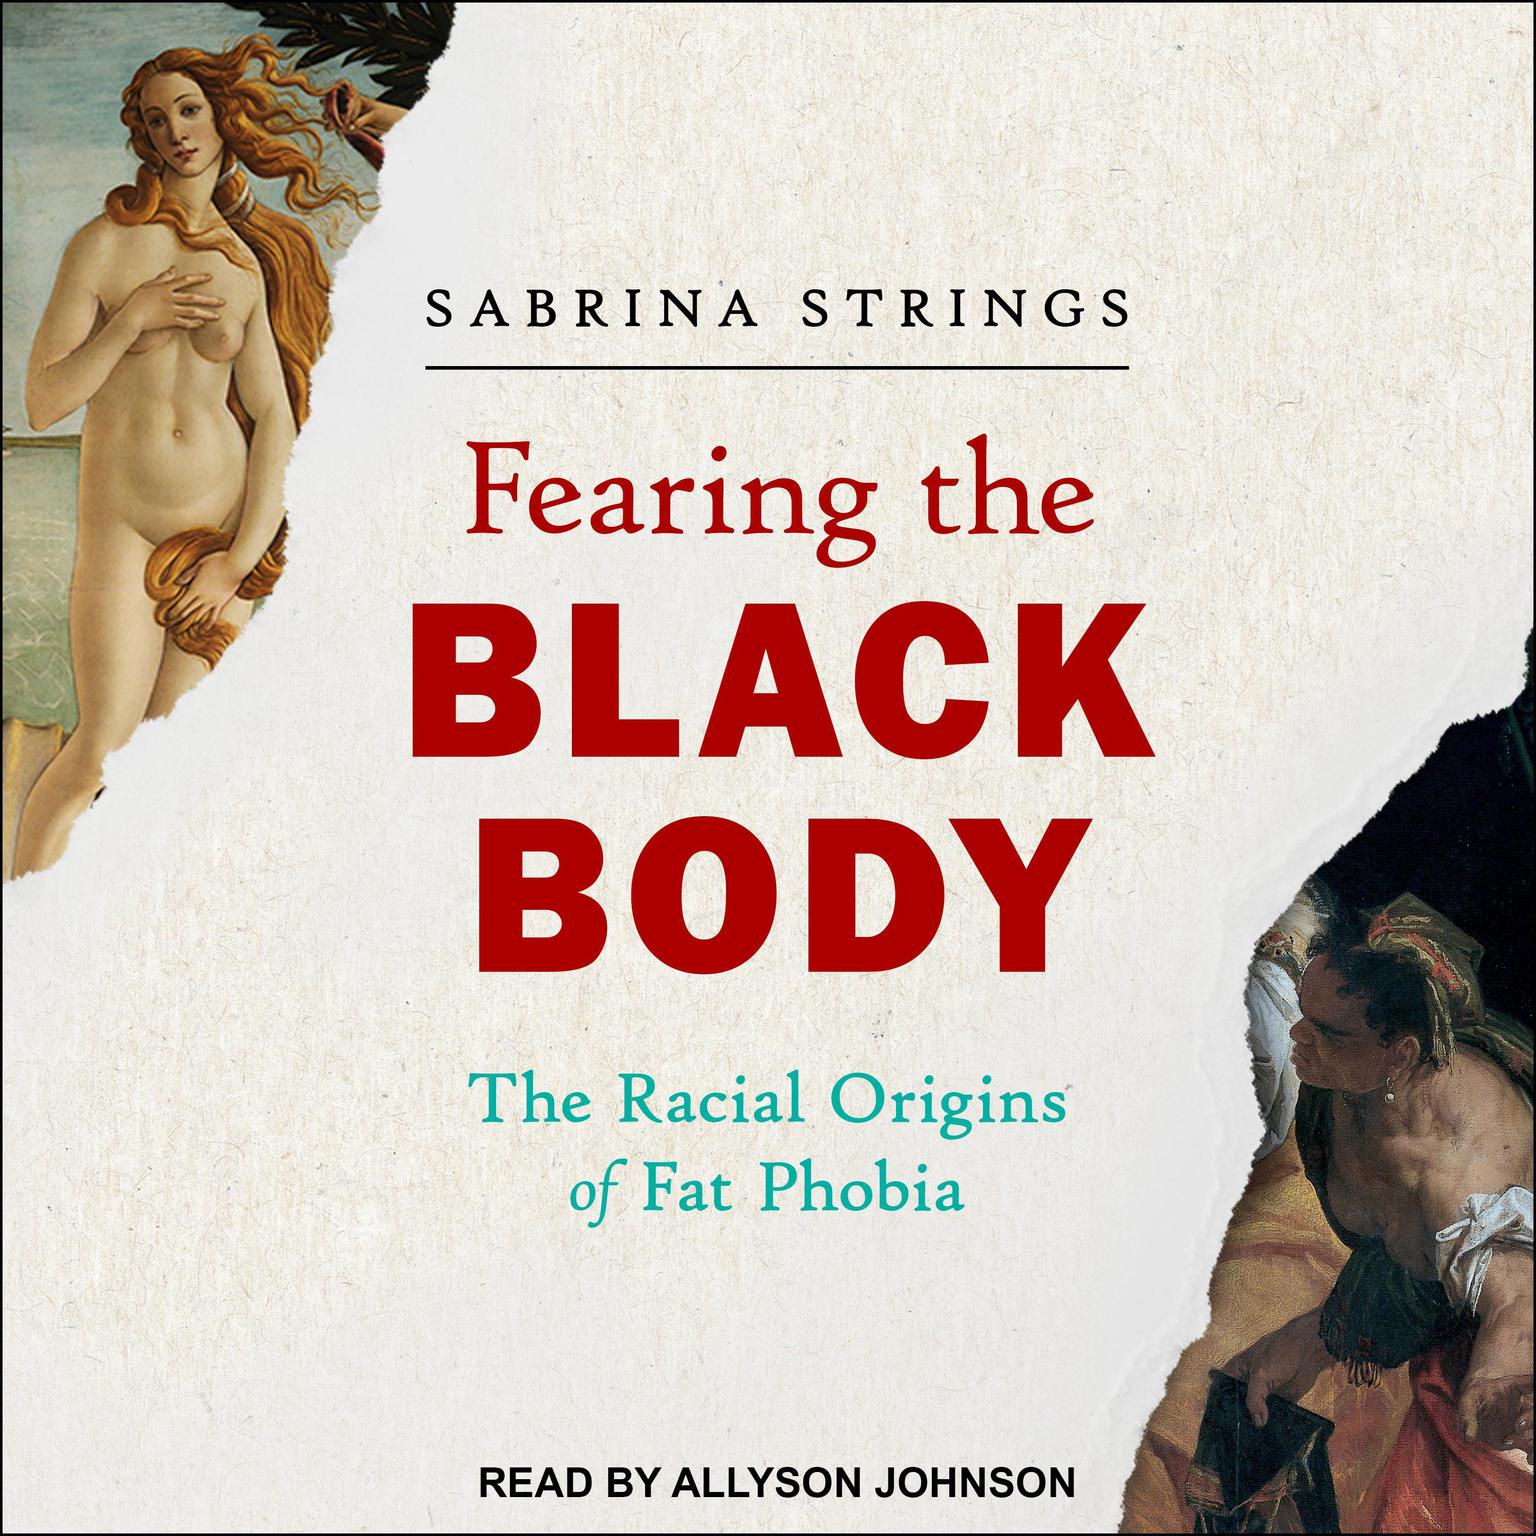 Fearing the Black Body: The Racial Origins of Fat Phobia Audiobook, by Sabrina Strings